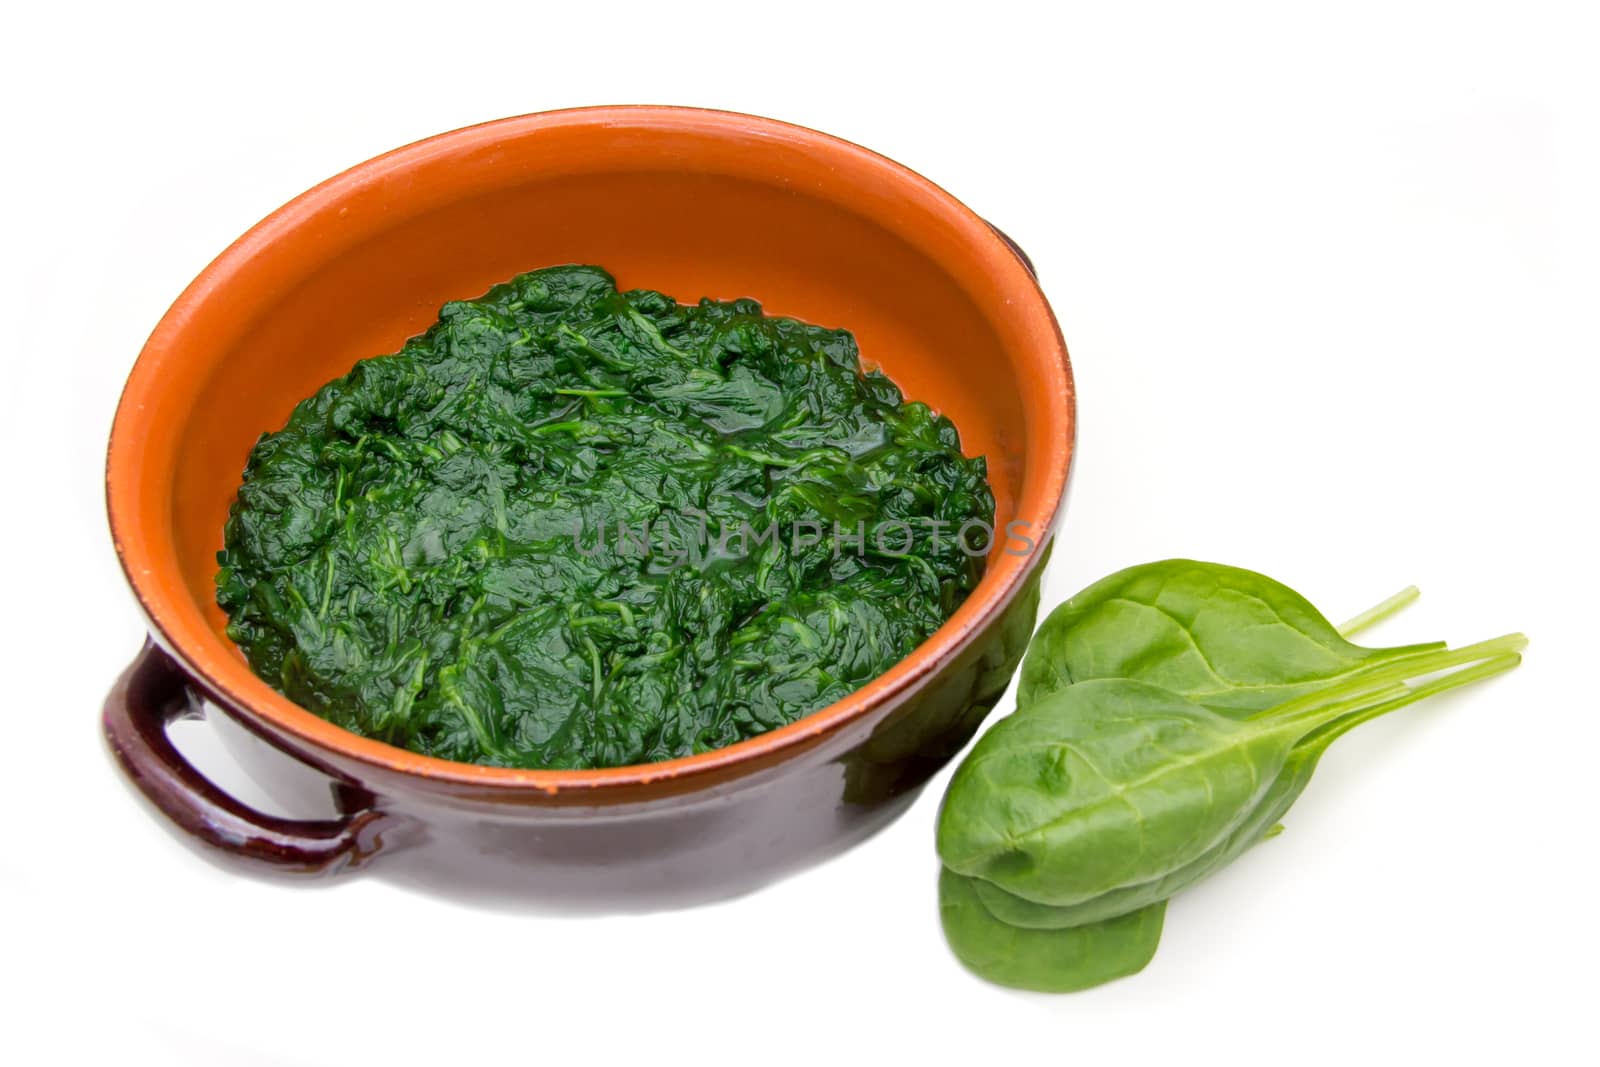 Spinach cooked in the pan on a white background